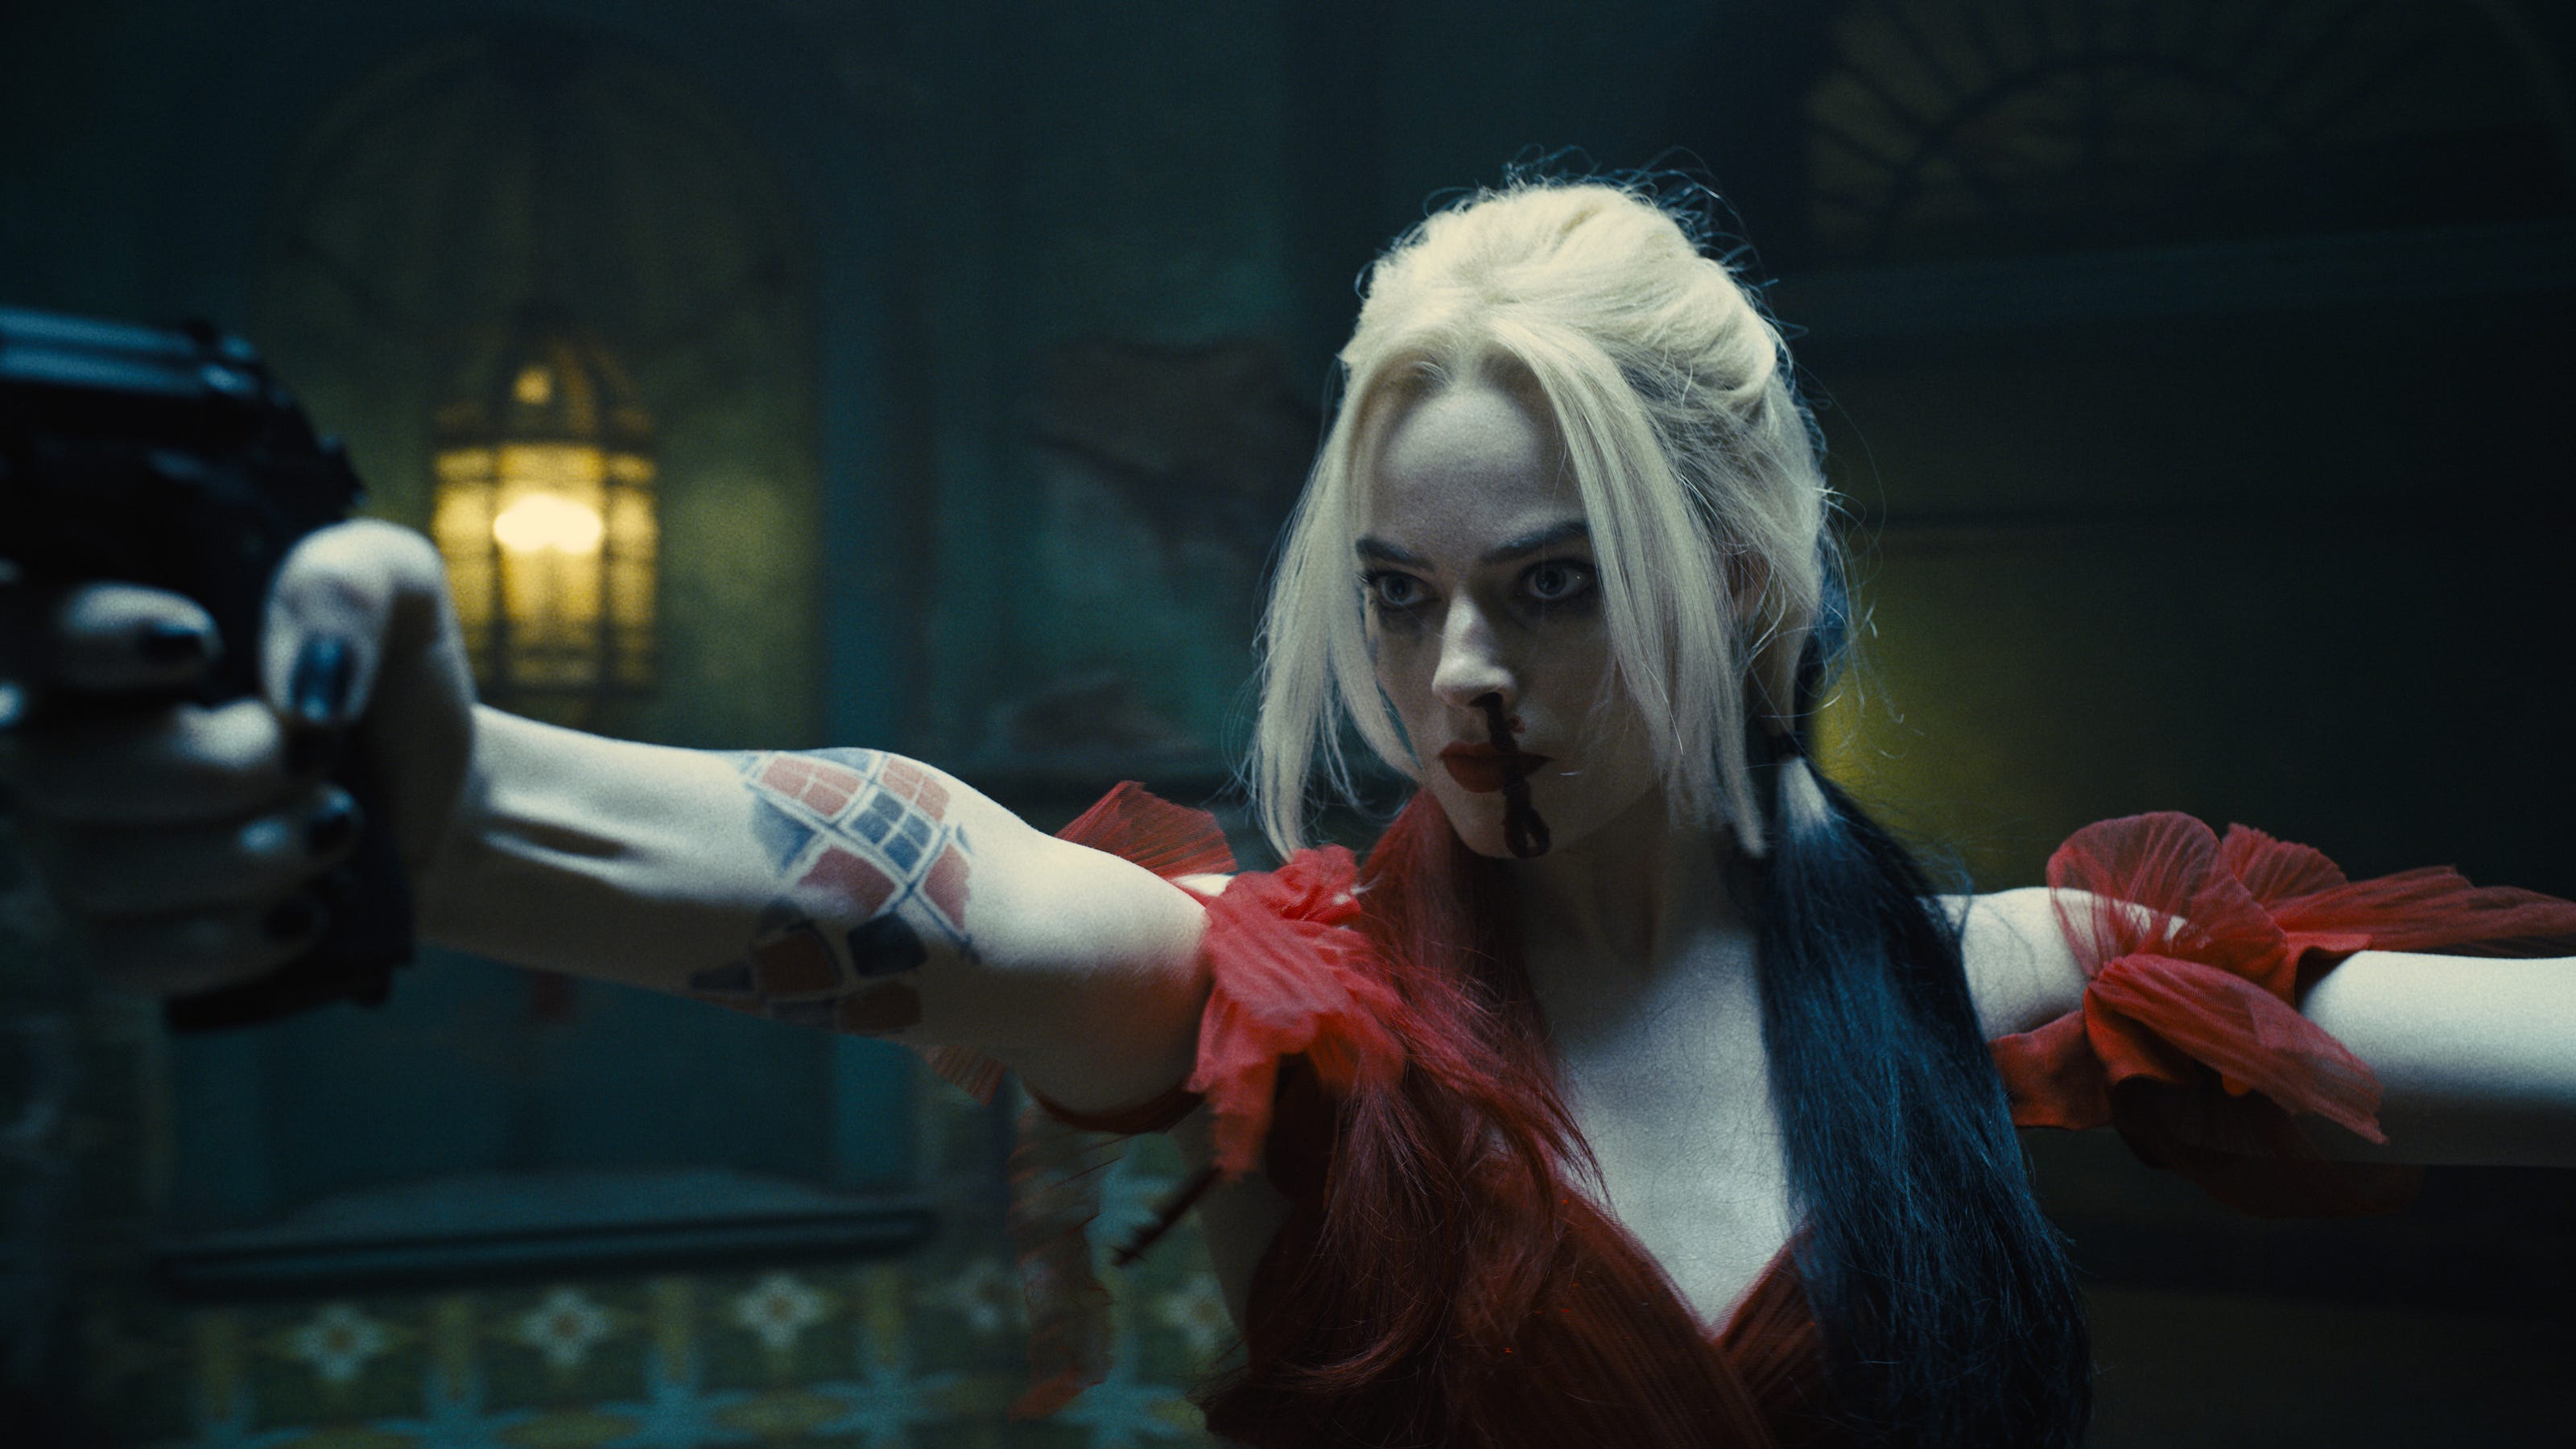 The Suicide Squad: Margot Robbie's Harley Quinn is dating again